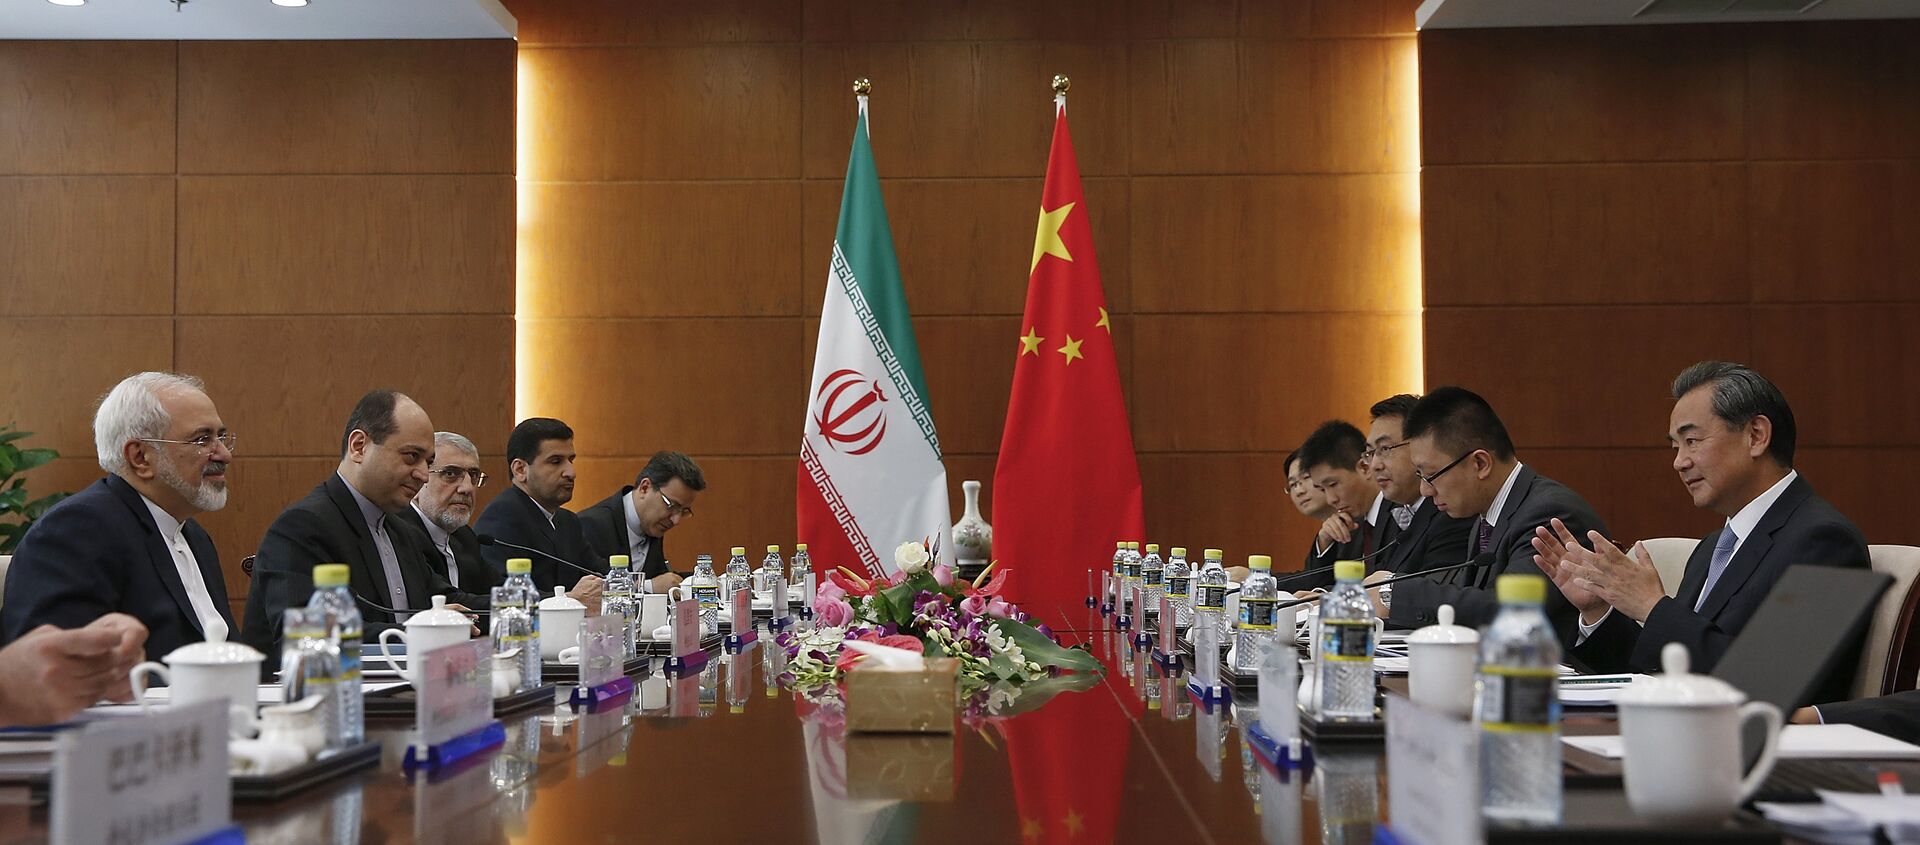 Chinese Foreign Minister Wang Yi, right, and Iranian Foreign Minister Mohammad Javad Zarif, left, attend a bilateral meeting Tuesday, Sept. 15, 2015 in Beijing, China - Sputnik Afrique, 1920, 29.03.2021